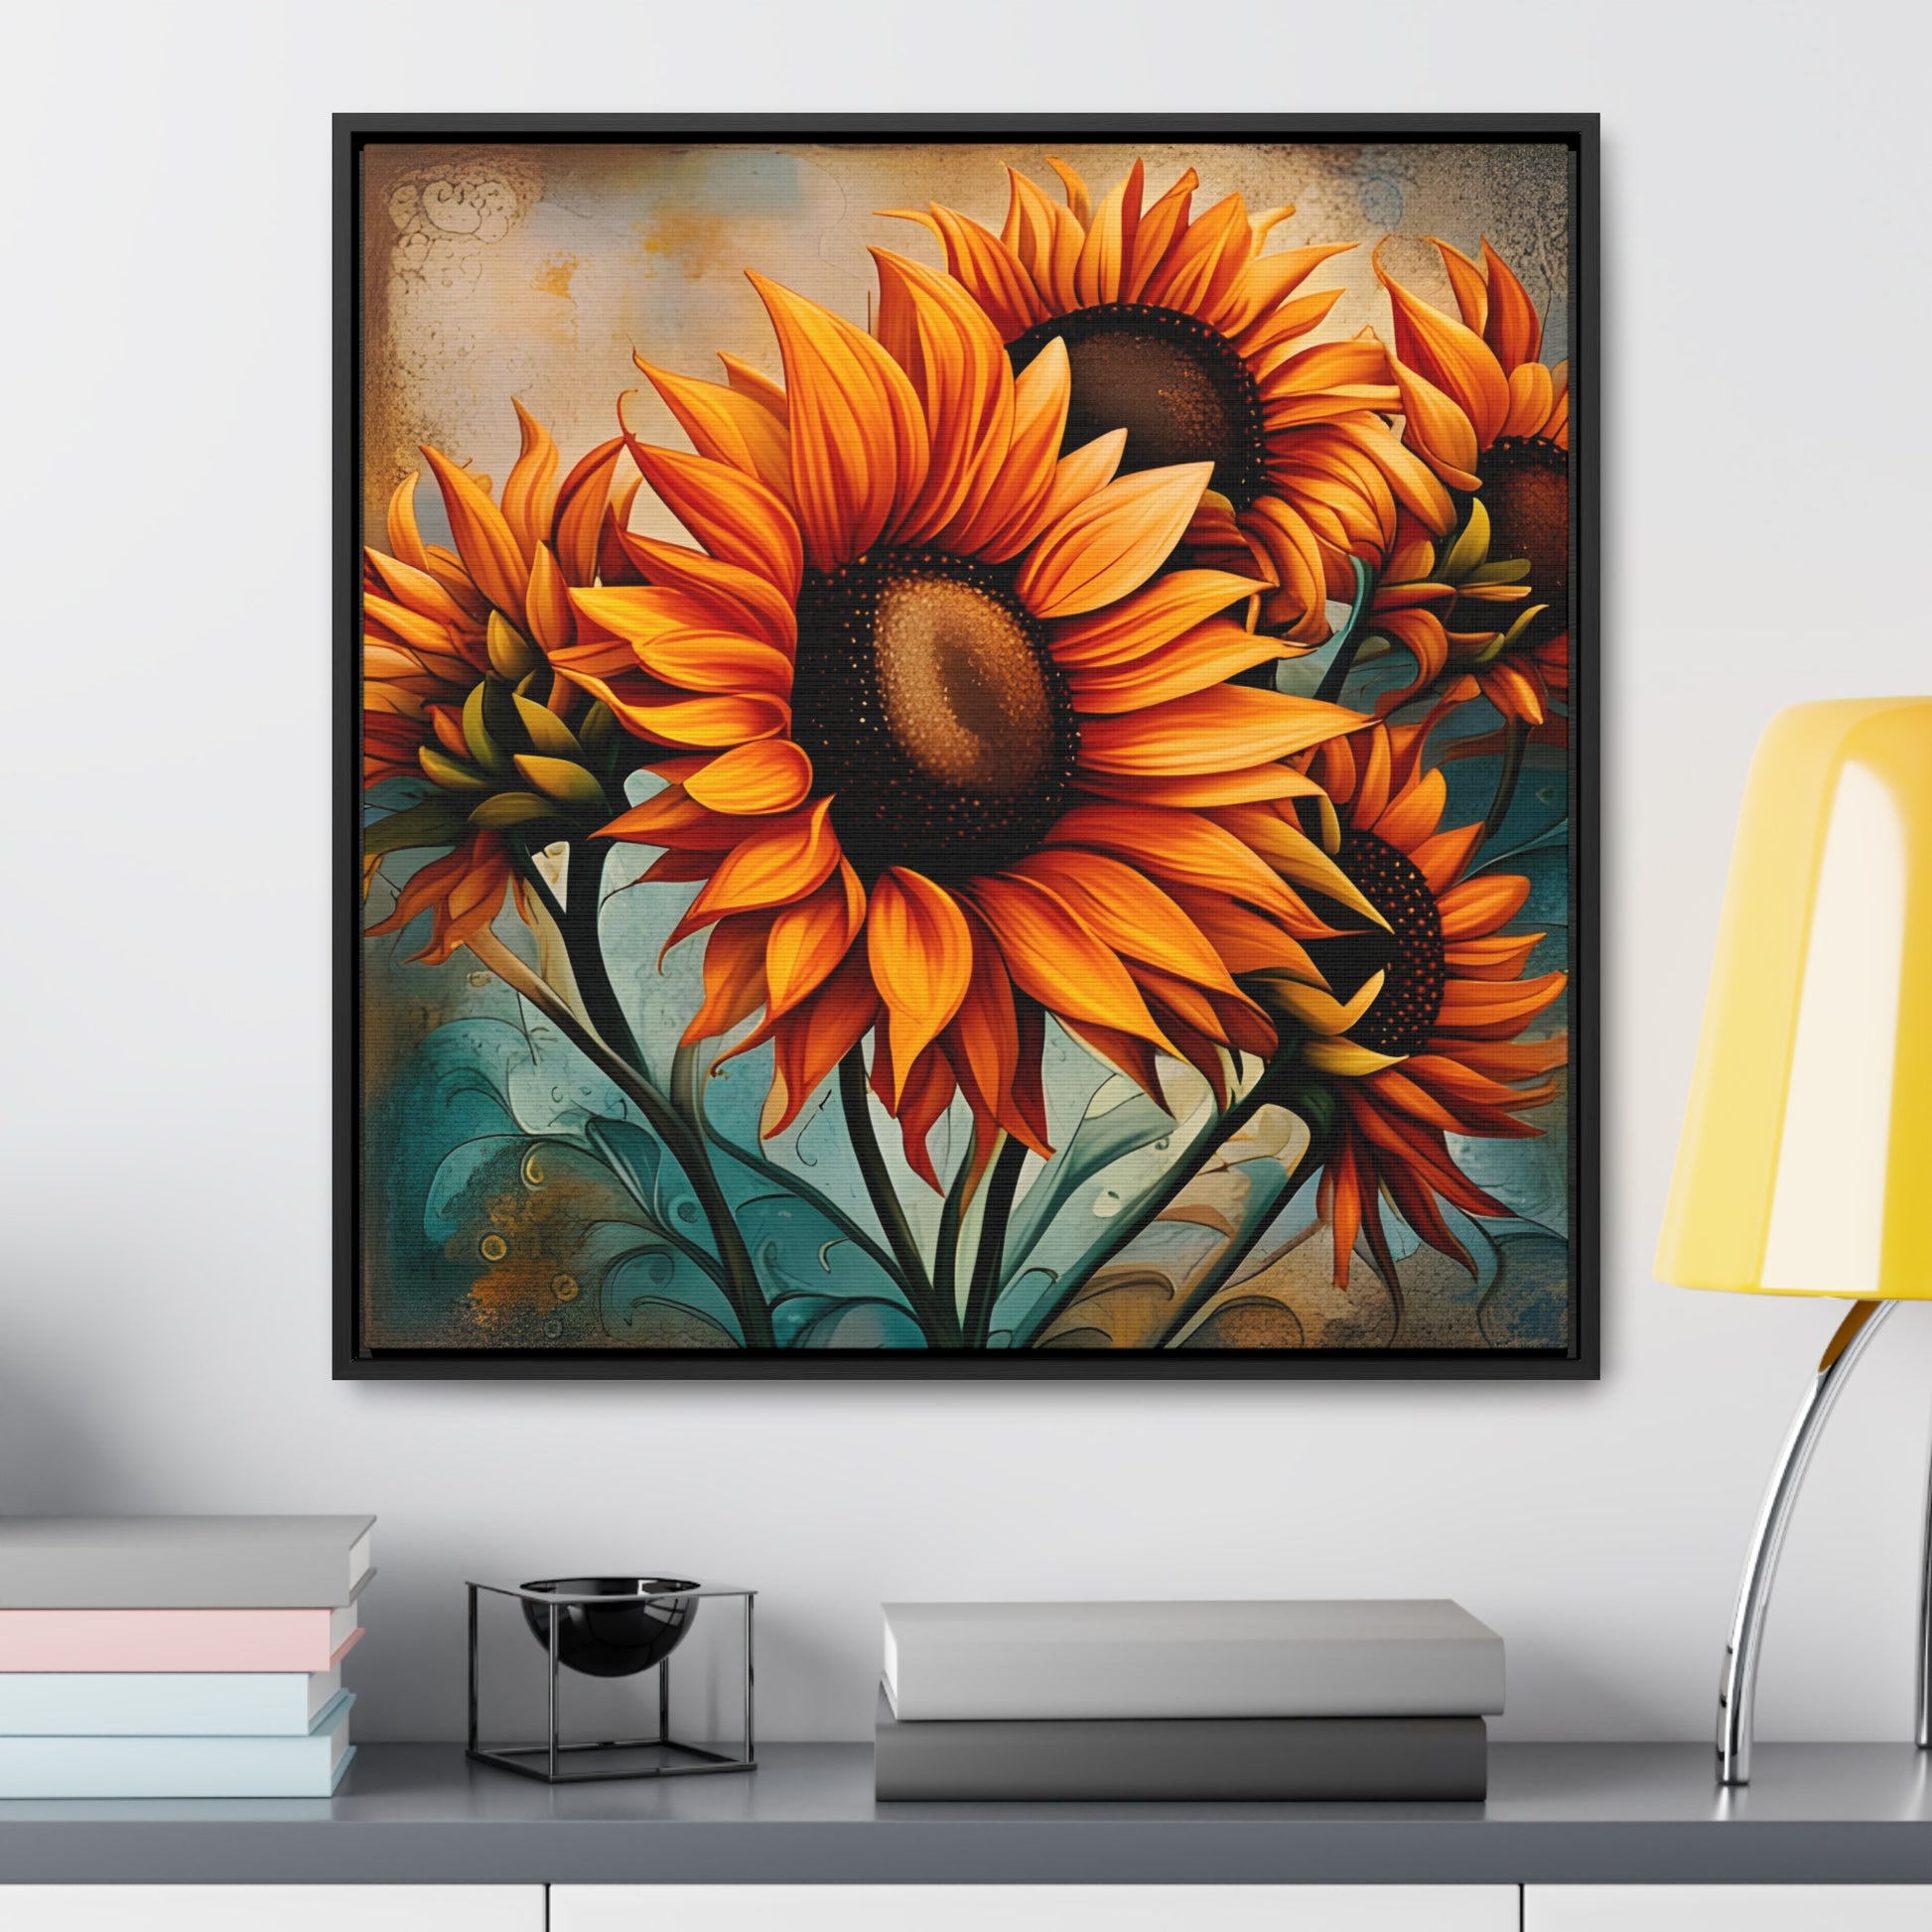 Sunflower Lovers Delight - Sunflower Crop on Distressed Blue and Copper Background Printed on Canvas in a Floating Frame 24x24